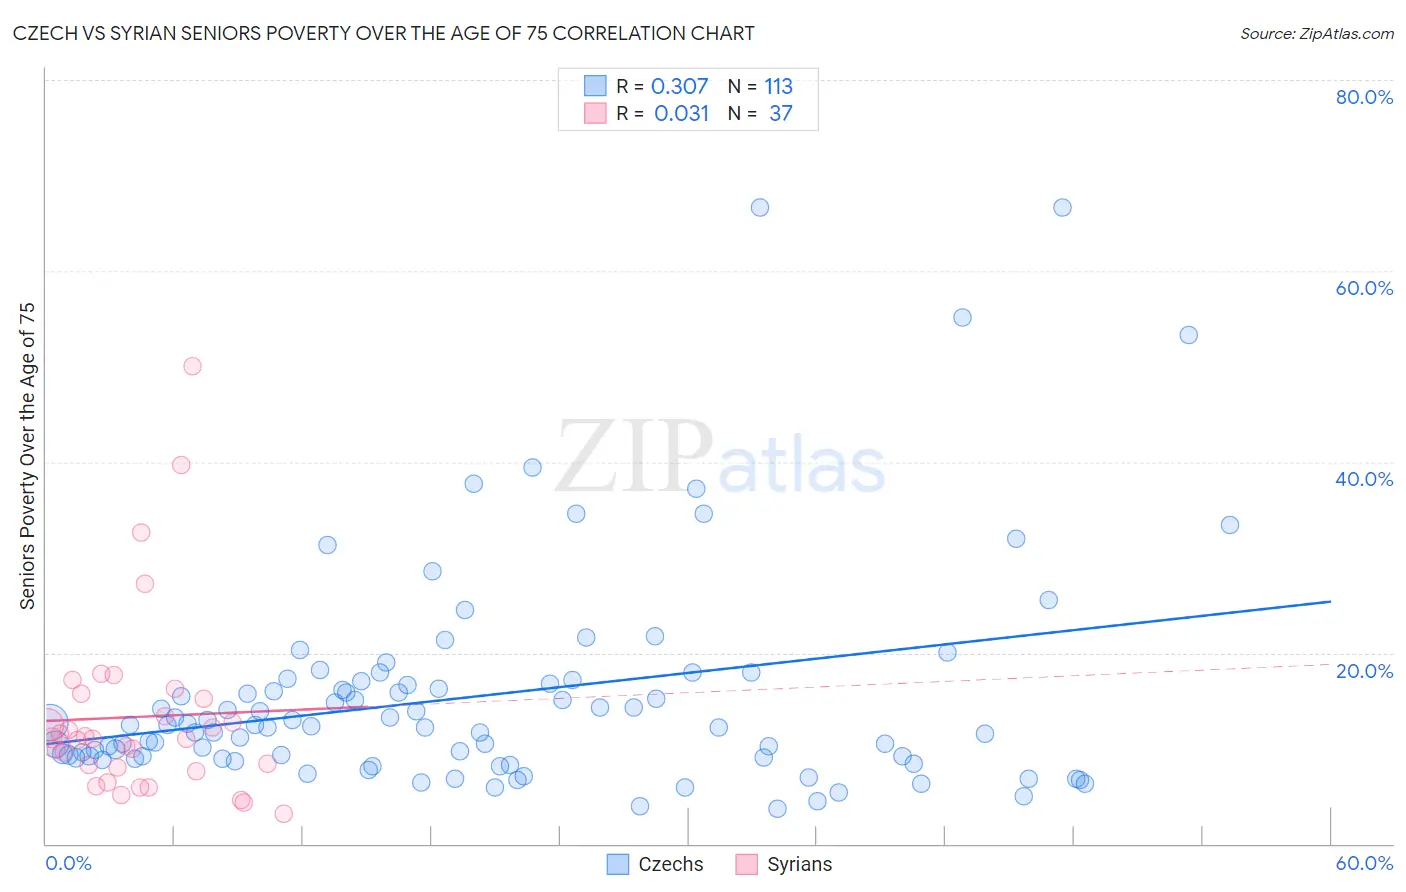 Czech vs Syrian Seniors Poverty Over the Age of 75